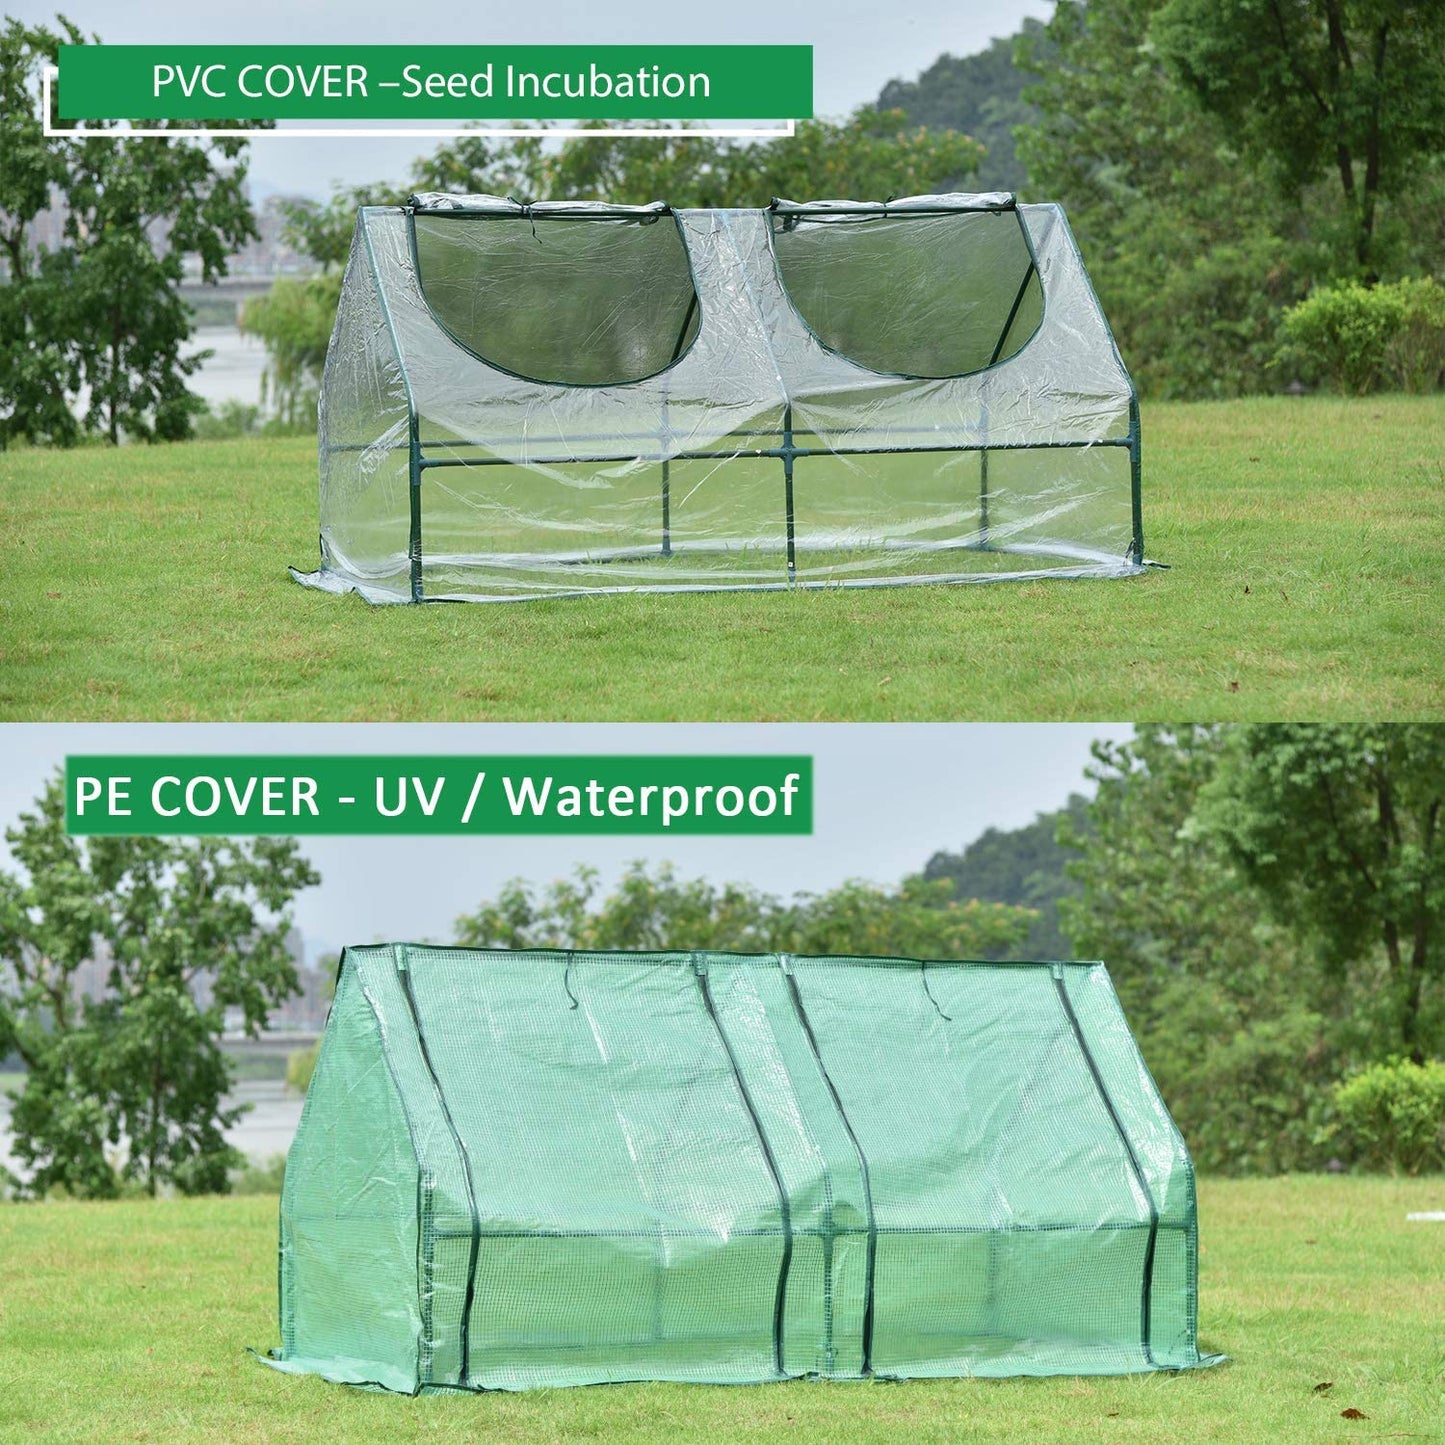 6 ft. x 3 ft. x 3ft. Mini Greenhouse with 2 Zipper Doors, Water Resistant UV Protected with 2 Covers Greenhouse Aoodor   